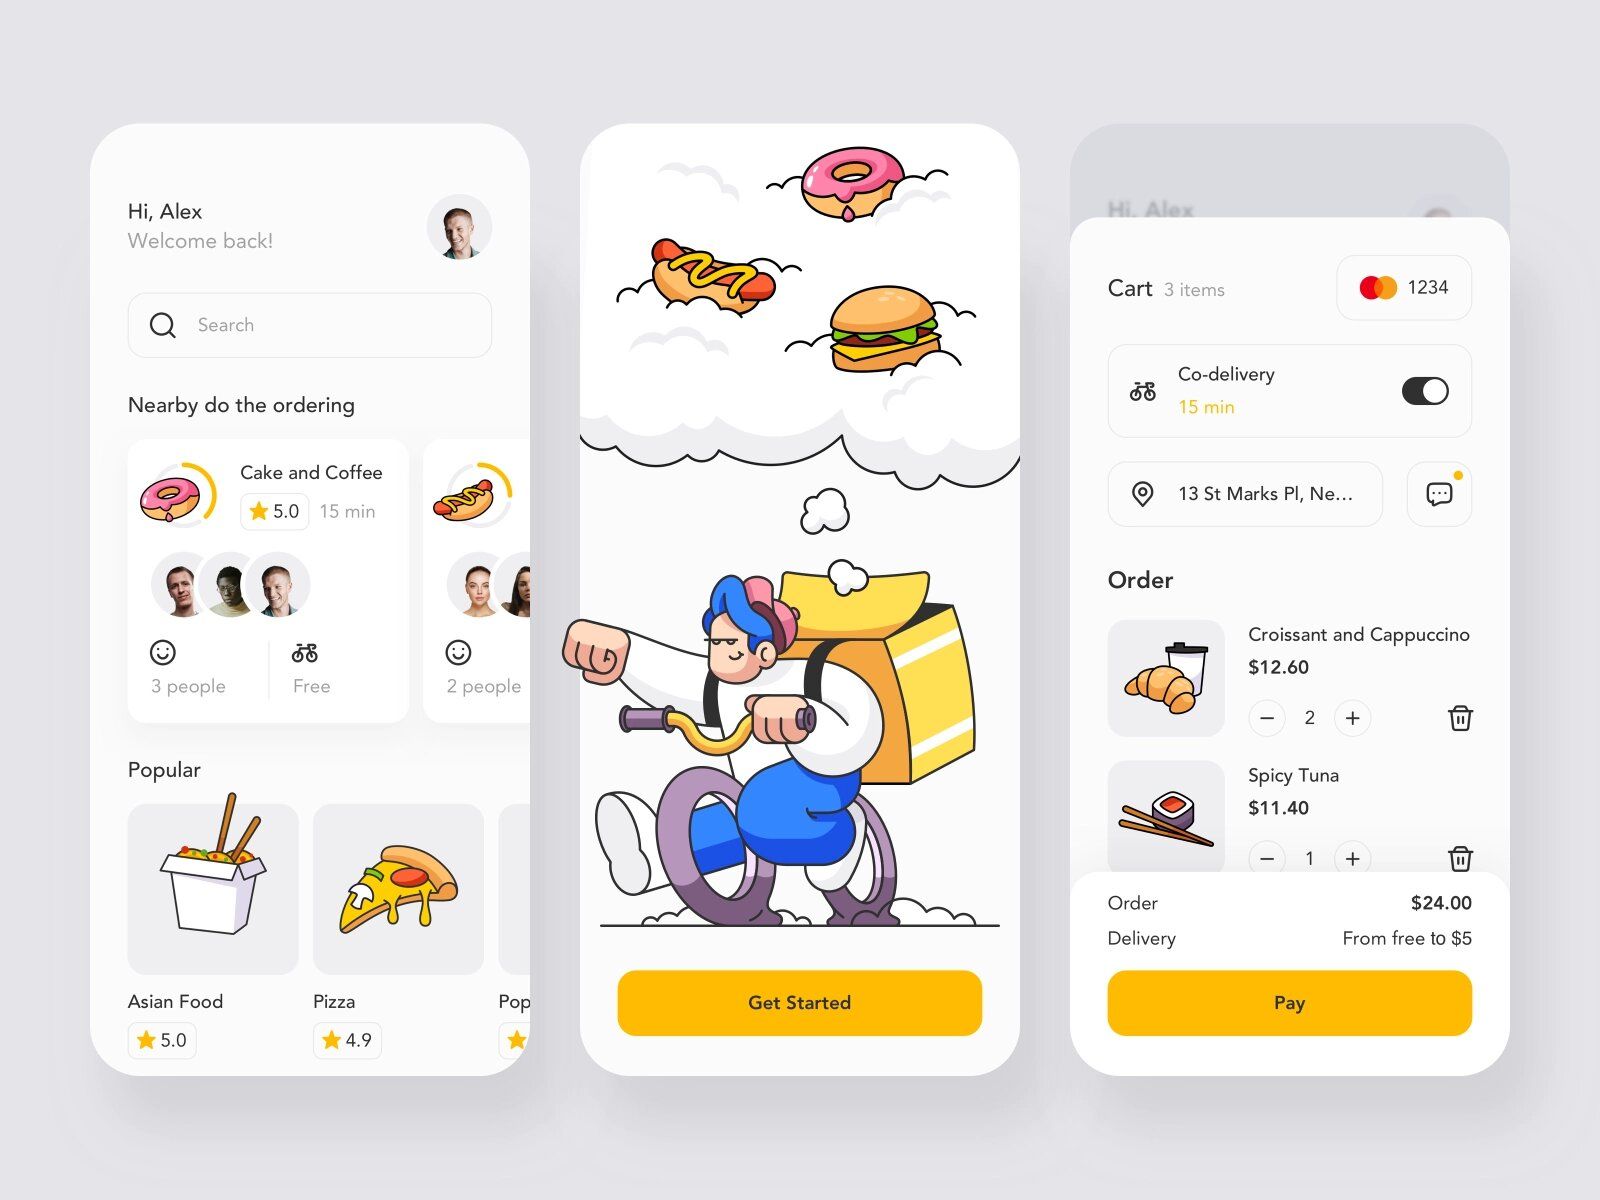 There are multiple food delivery app development options that are diversified by food delivery mobile app types and ways of development (custom, white-label, etc.) (*image by [Agilie Team](https://dribbble.com/agilie){ rel="nofollow" target="_blank" .default-md}*)